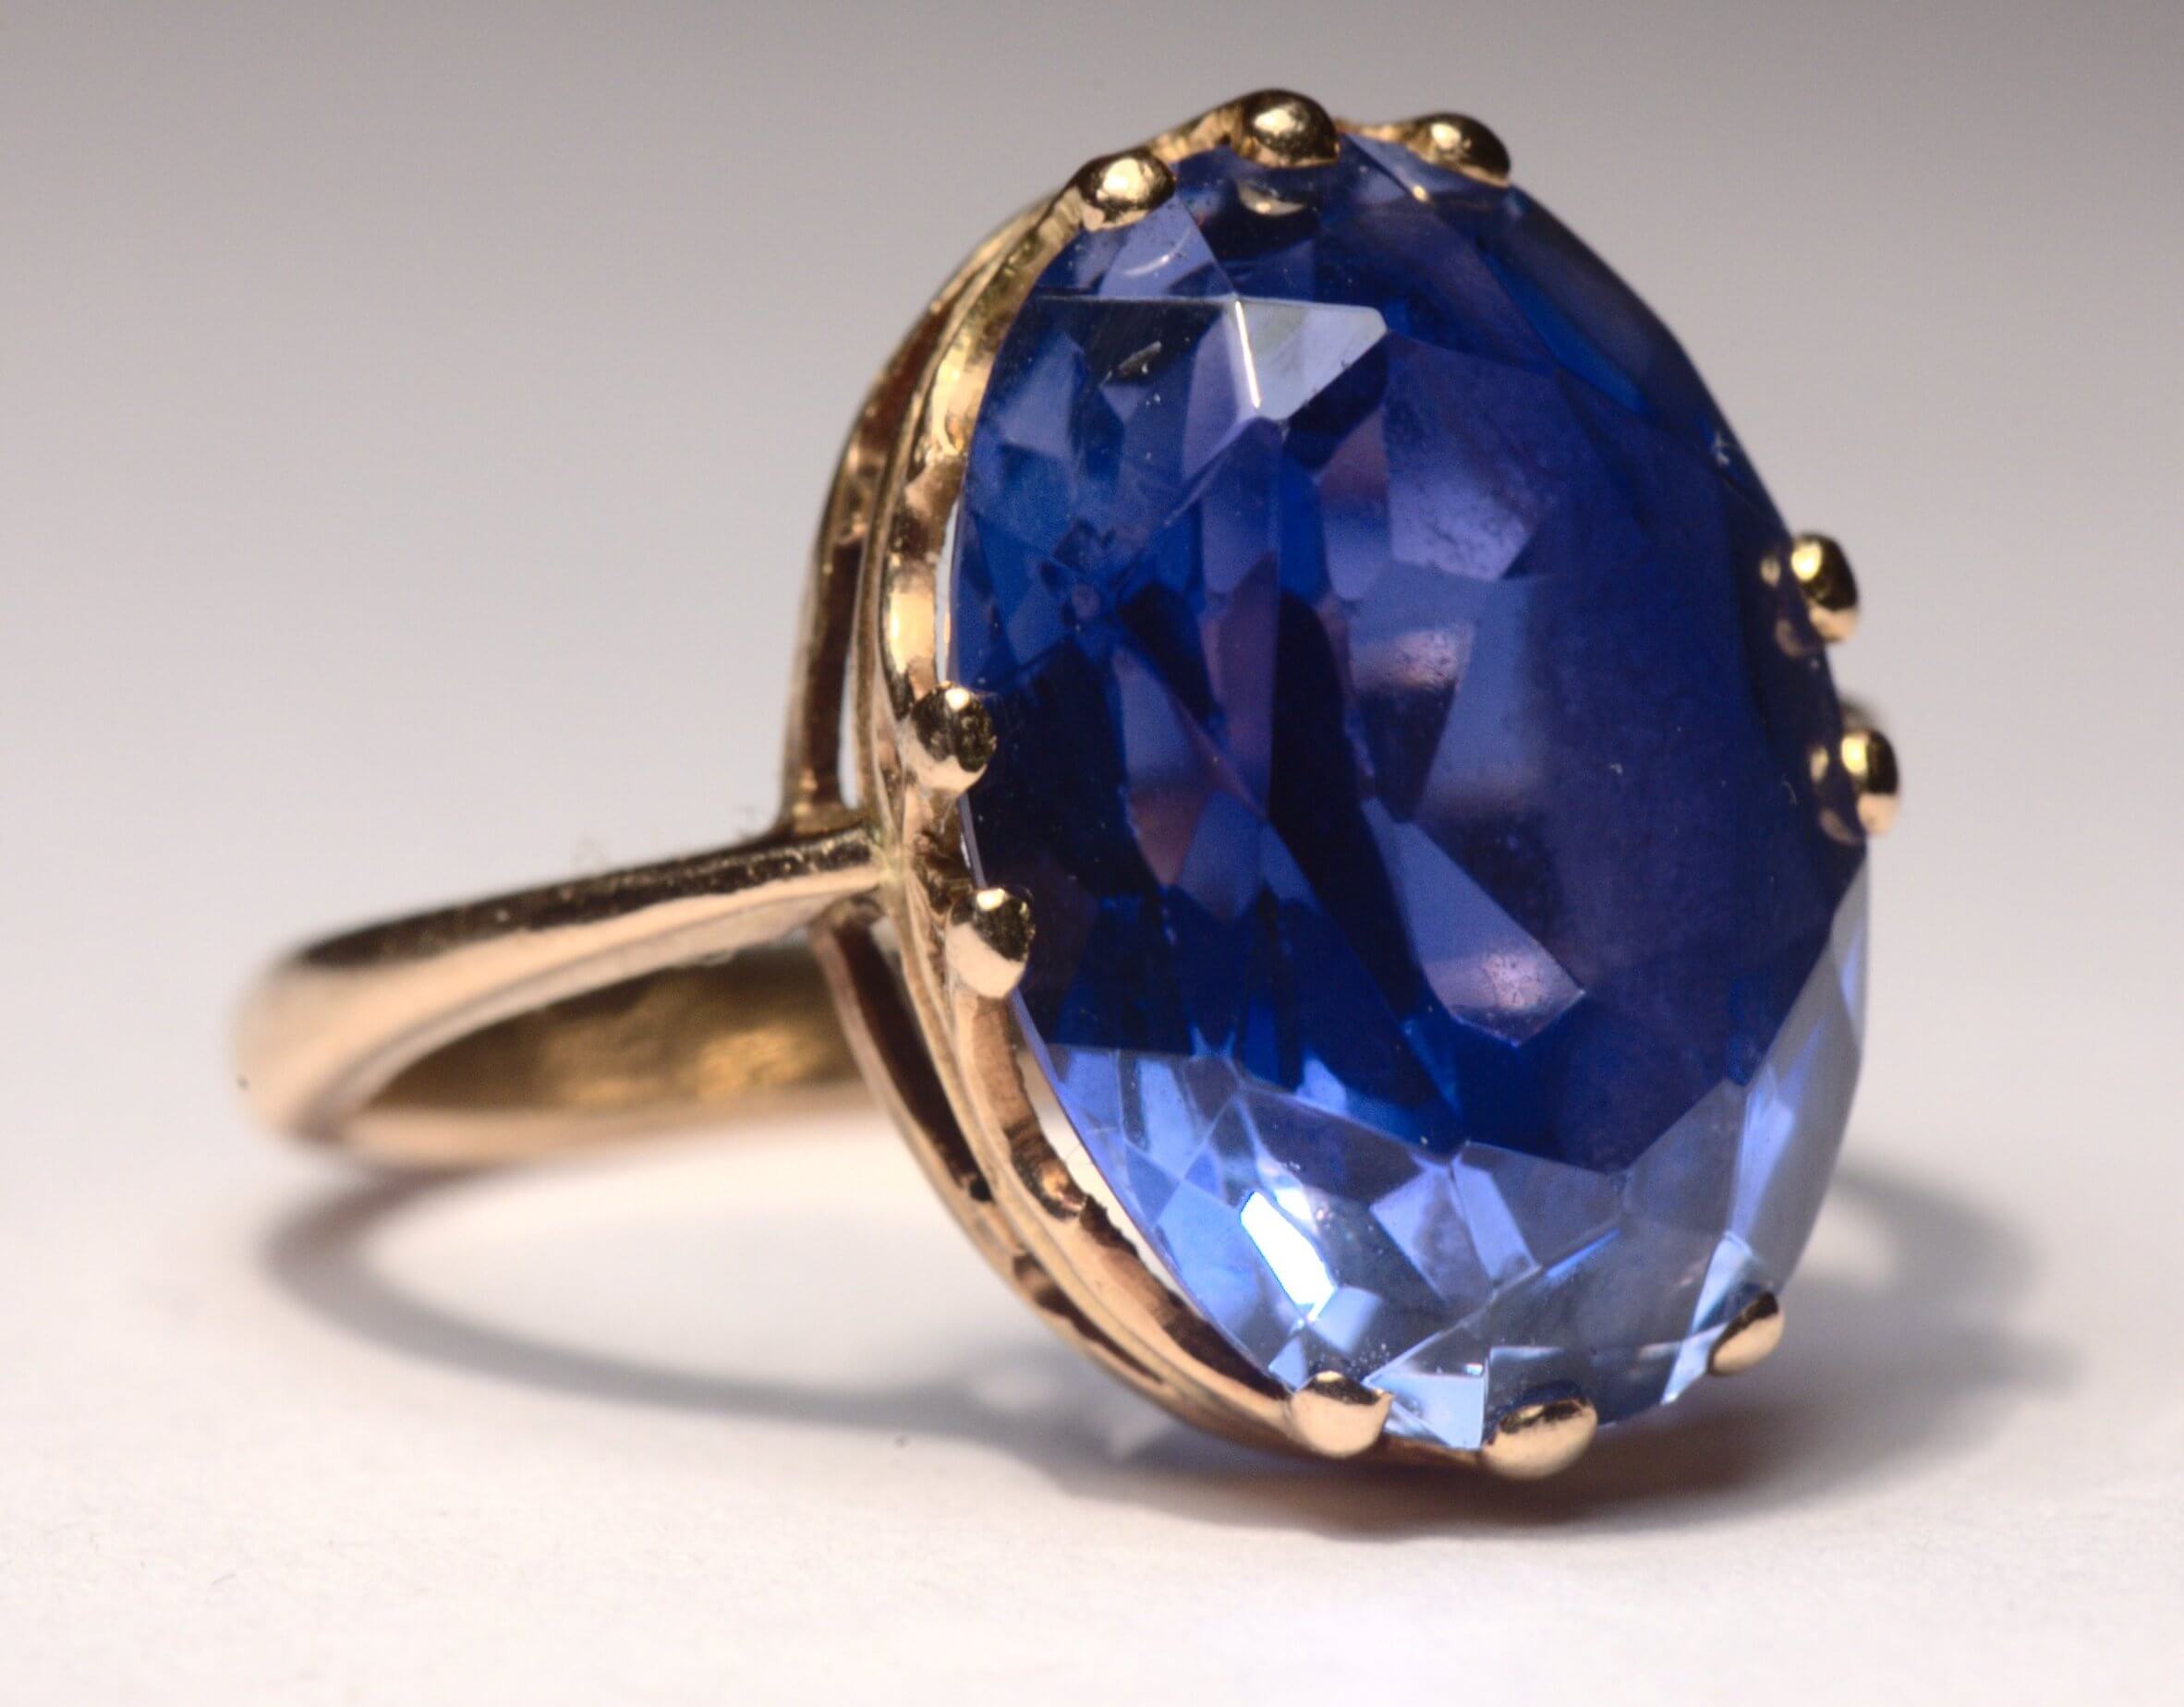 Where Does Blue Sapphire Come From?